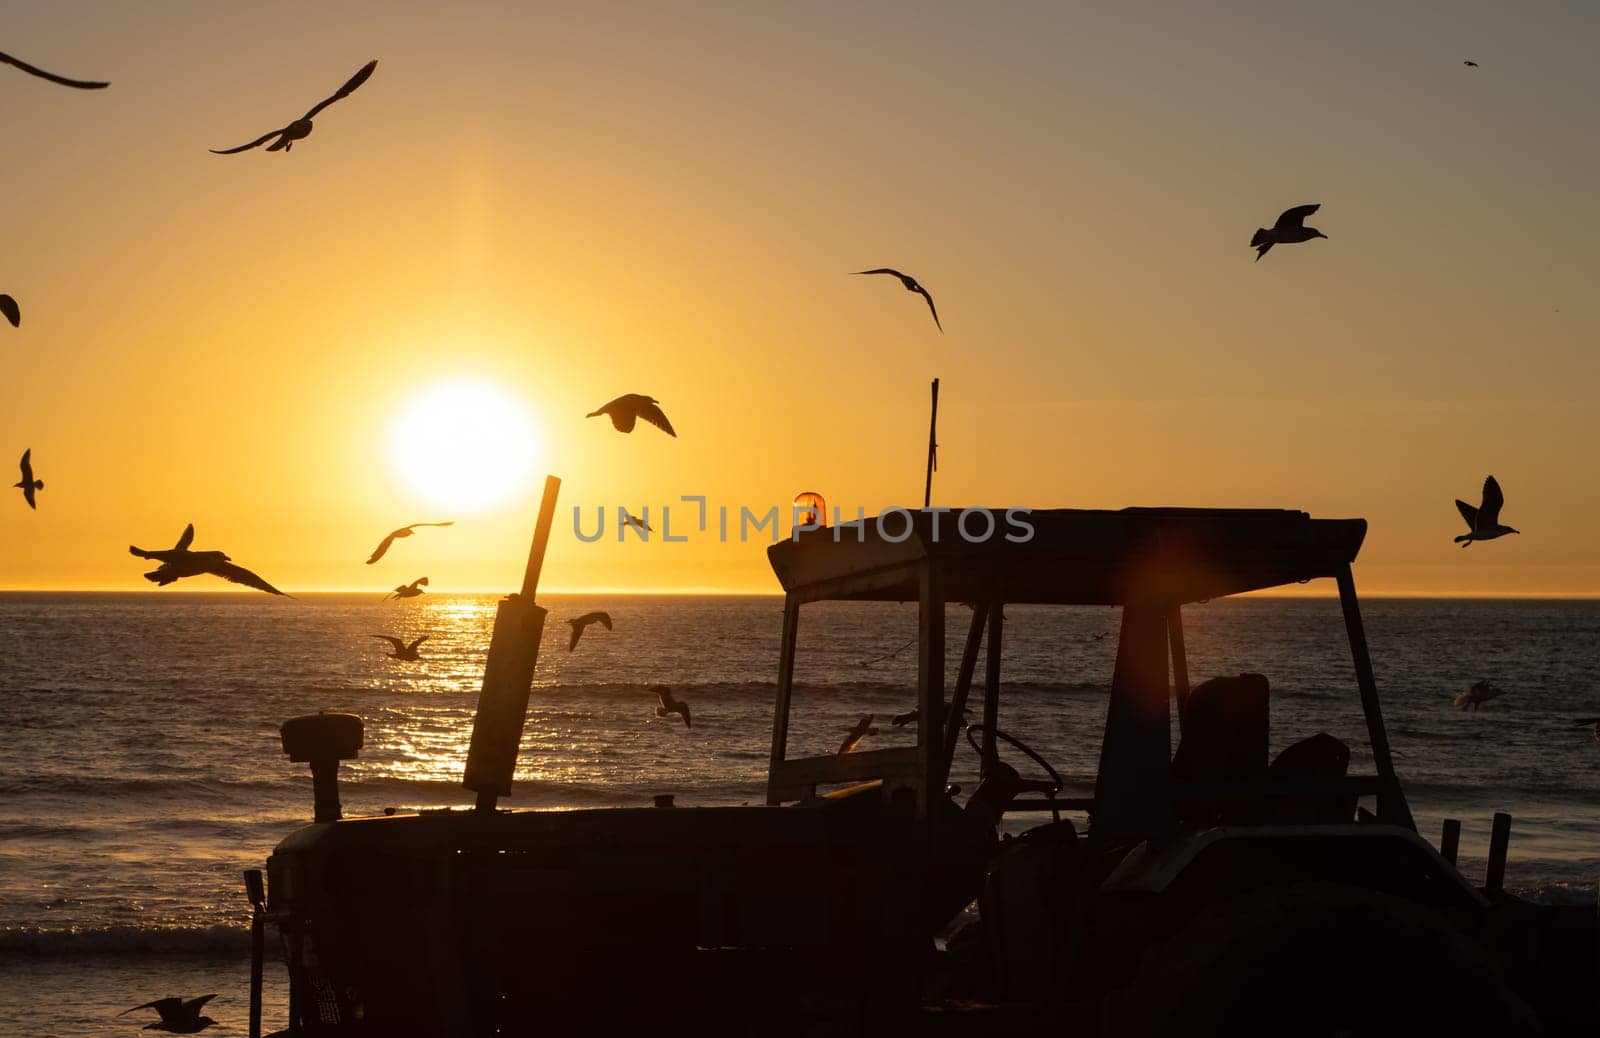 Seagulls fly over the sea at sunset - a tractor that helps in fishing stands on the shore by Studia72